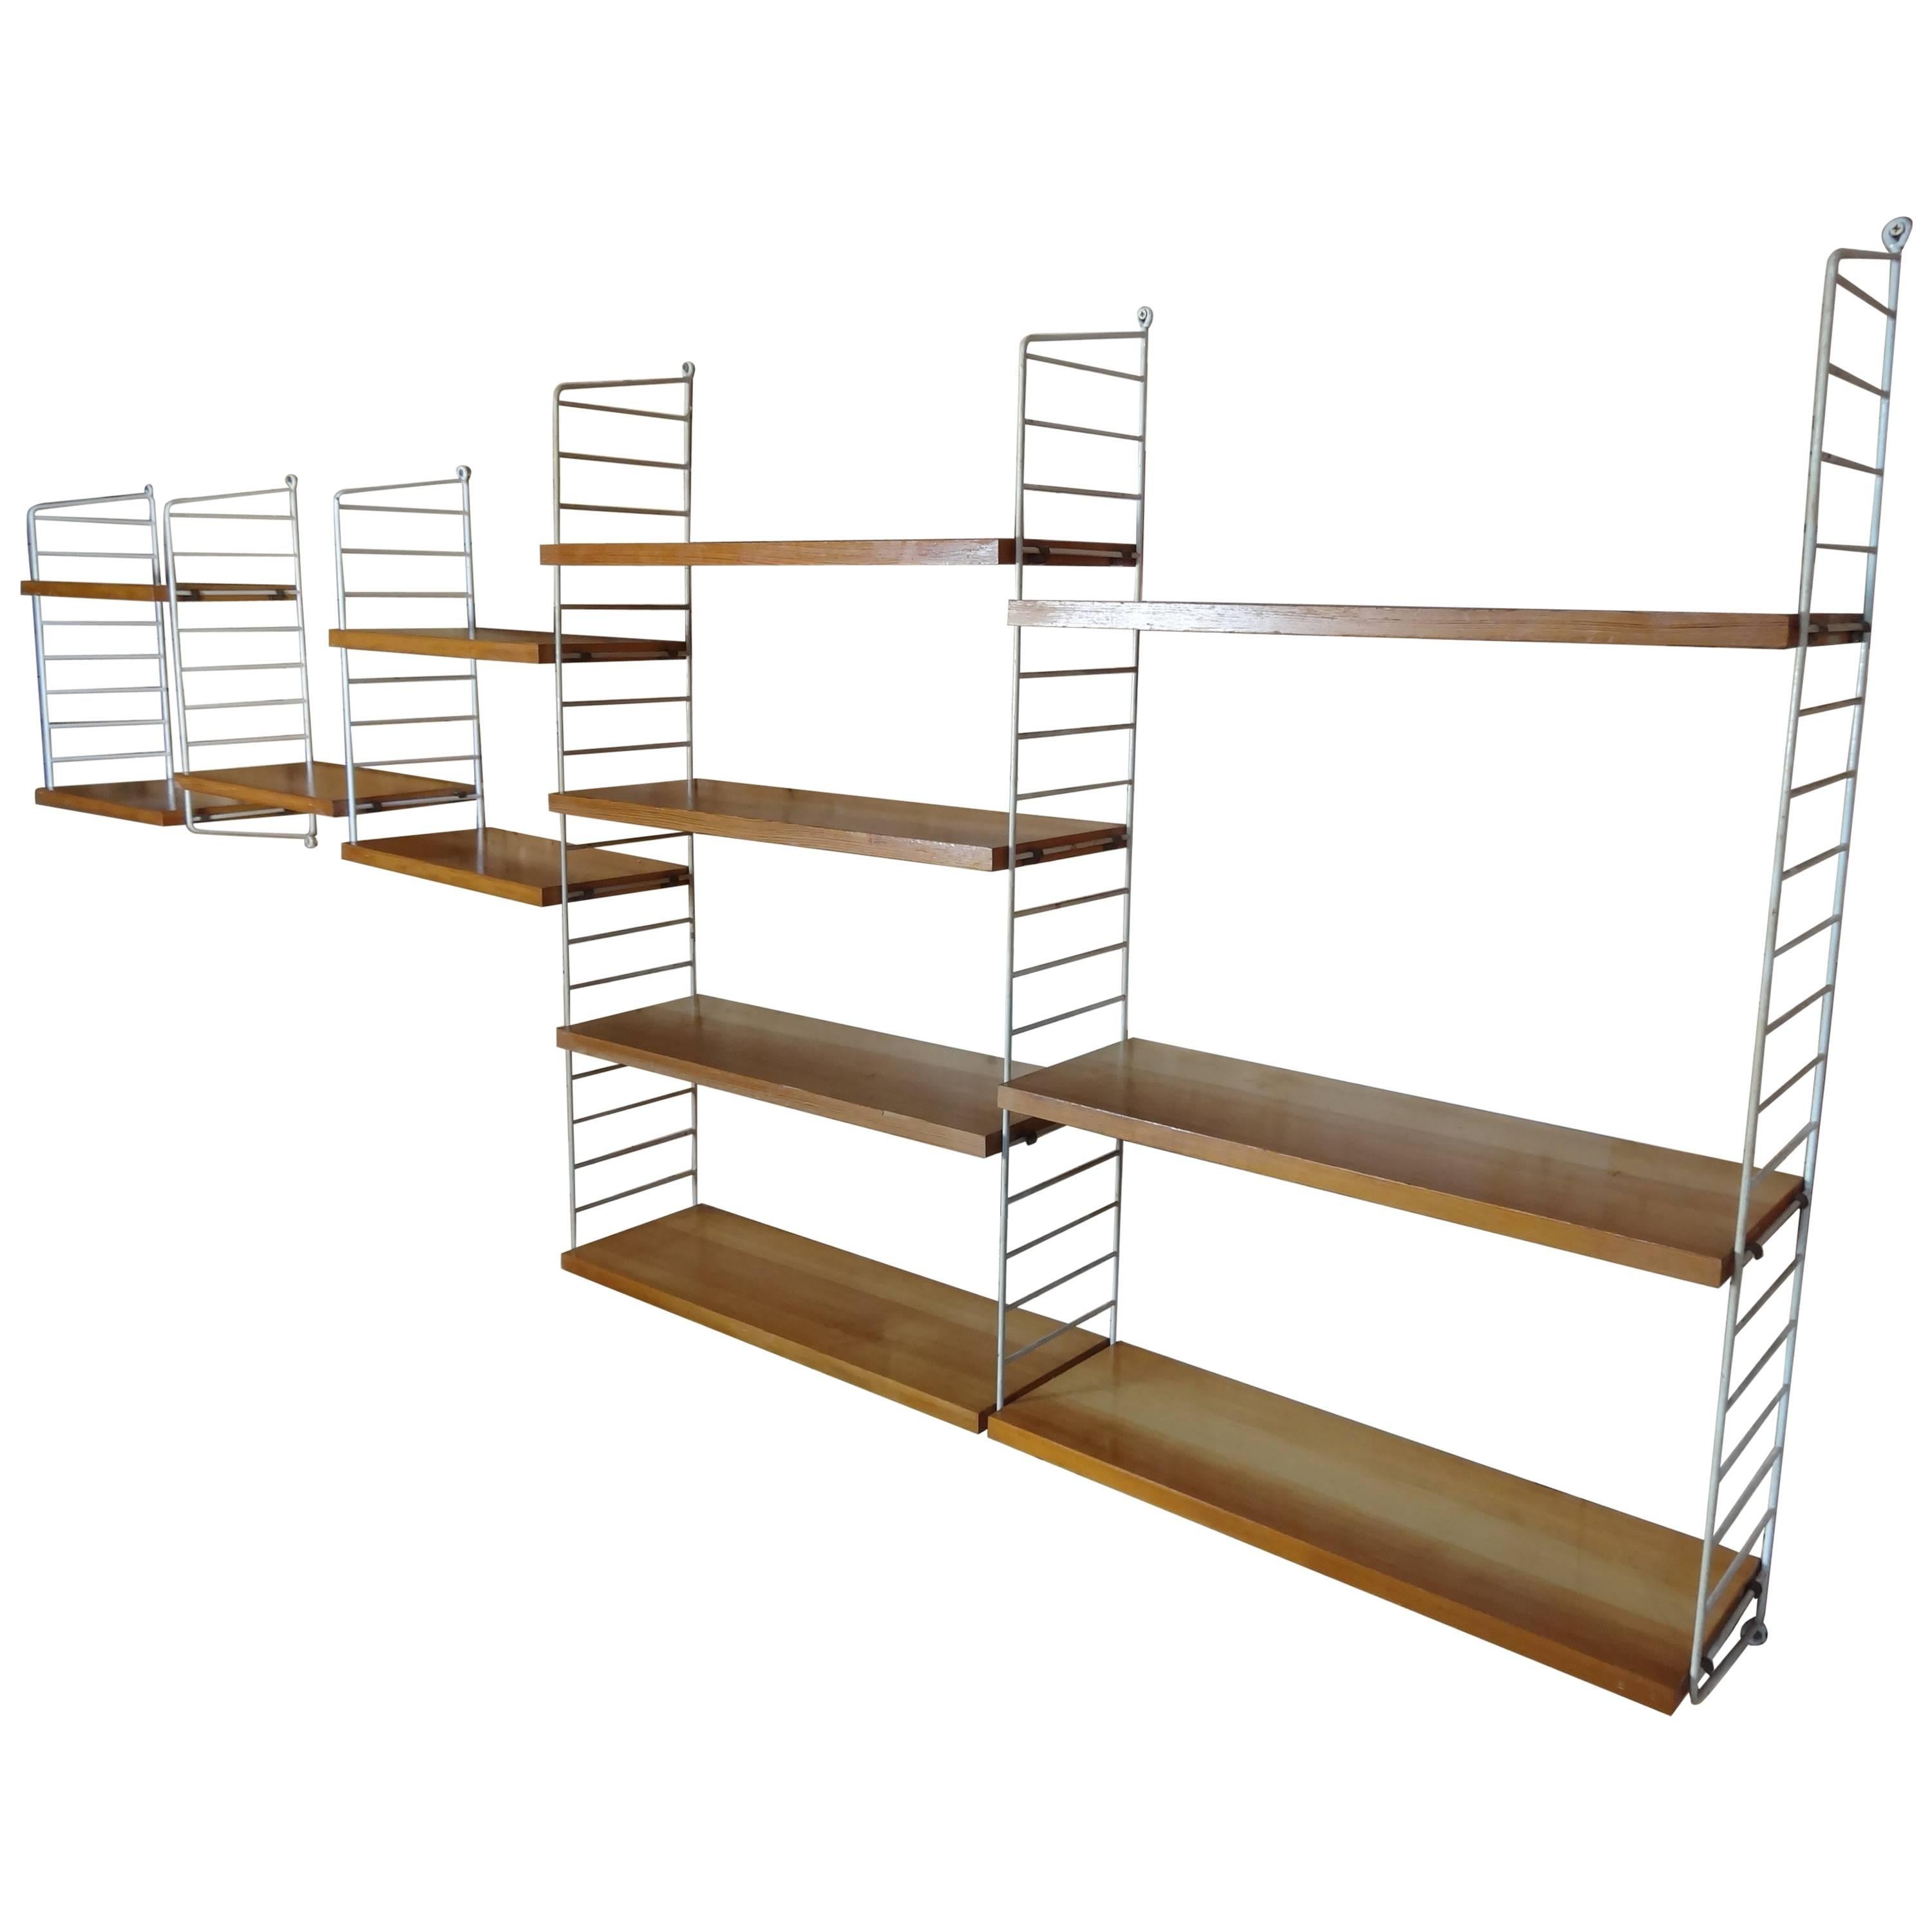 Extra Large Retro Vintage Shelving Unit by Nisse Strinning for String, 1960s